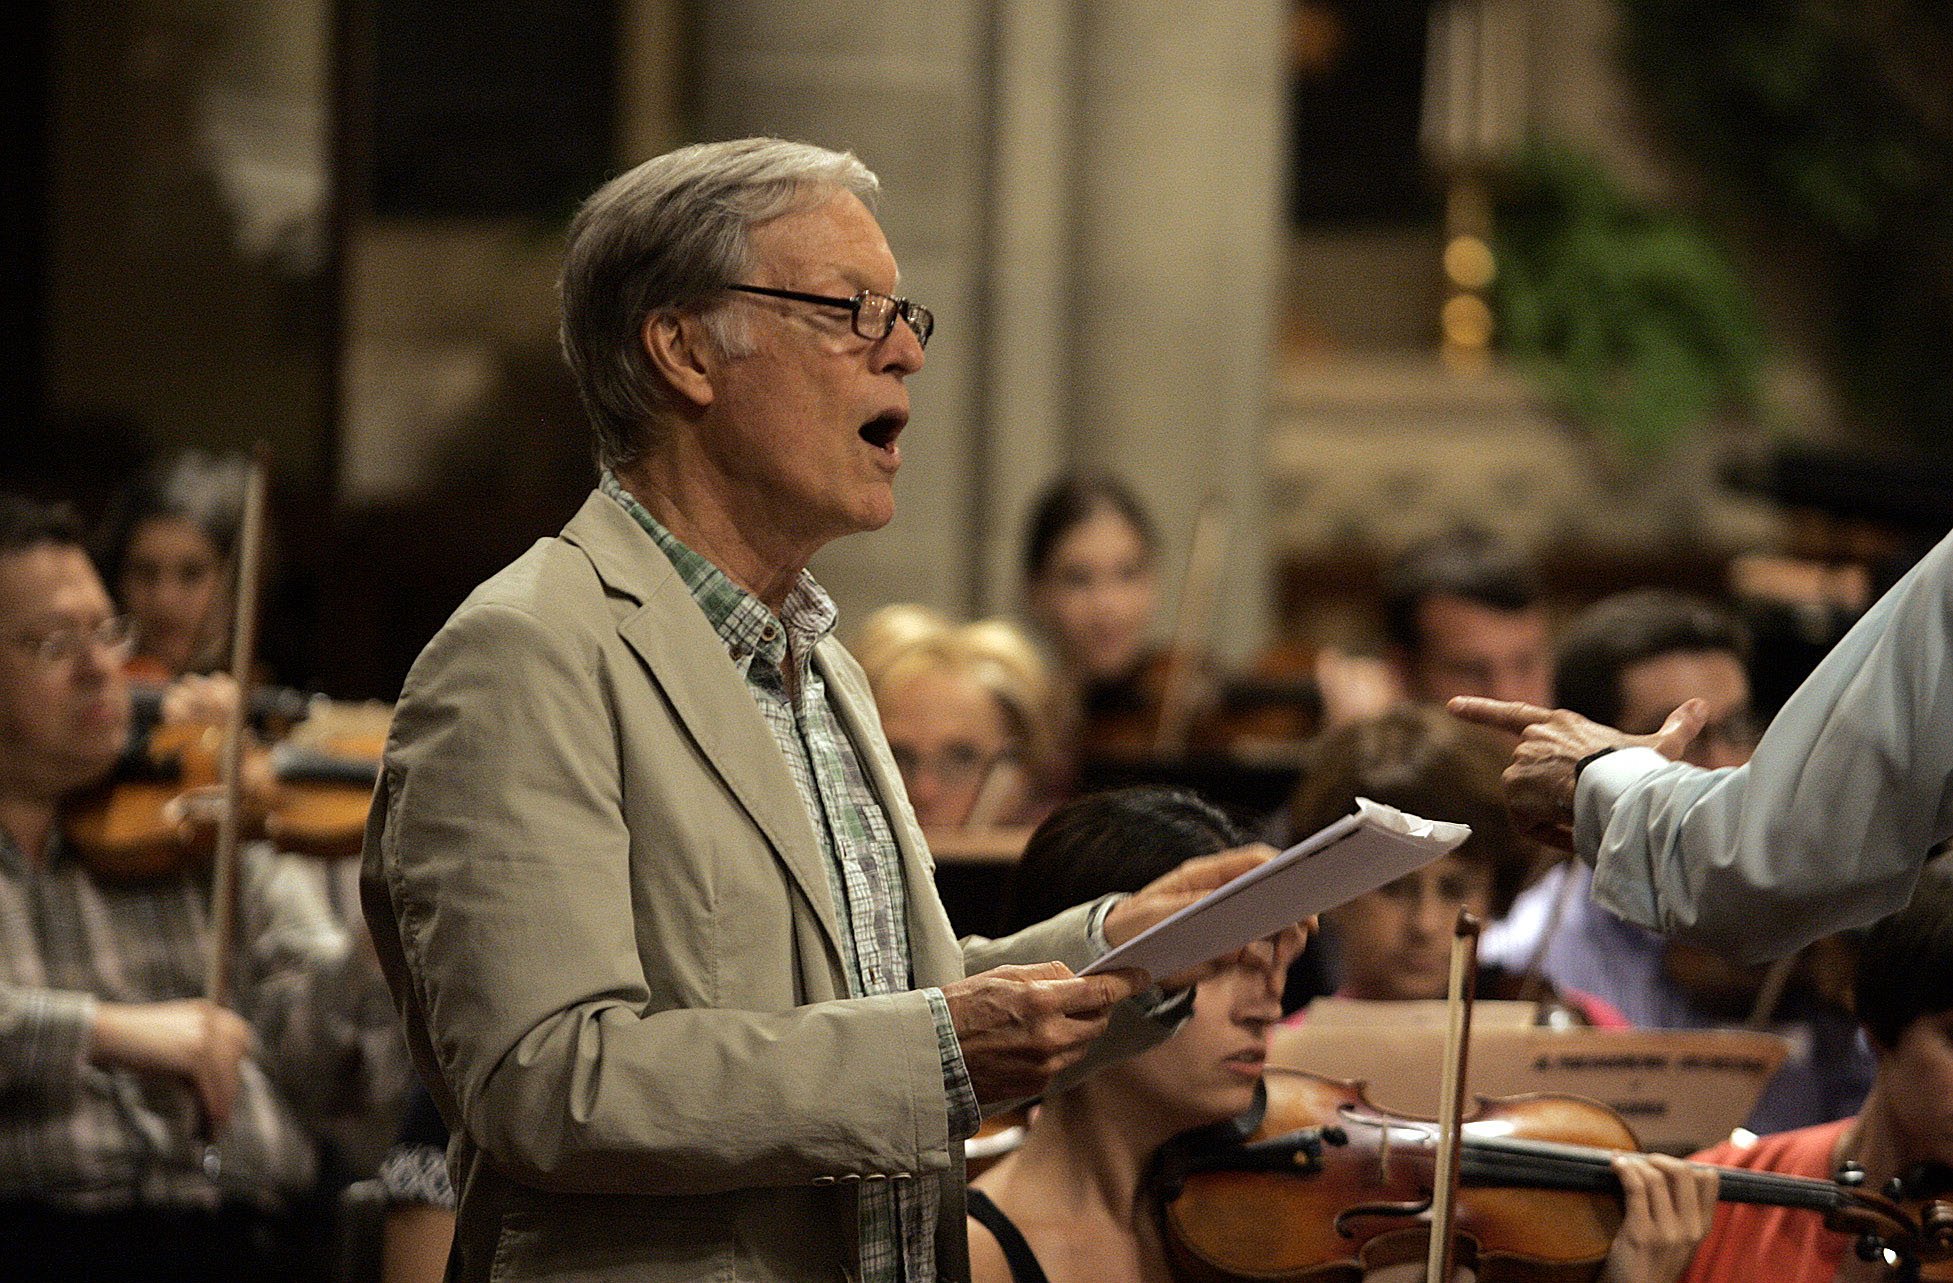 Richard Chamberlain rehearses narrations from "Camelot" with the Los Angeles Lawyers Philharmonic in Los Angeles on July 12, 2010. | Source: Getty Images